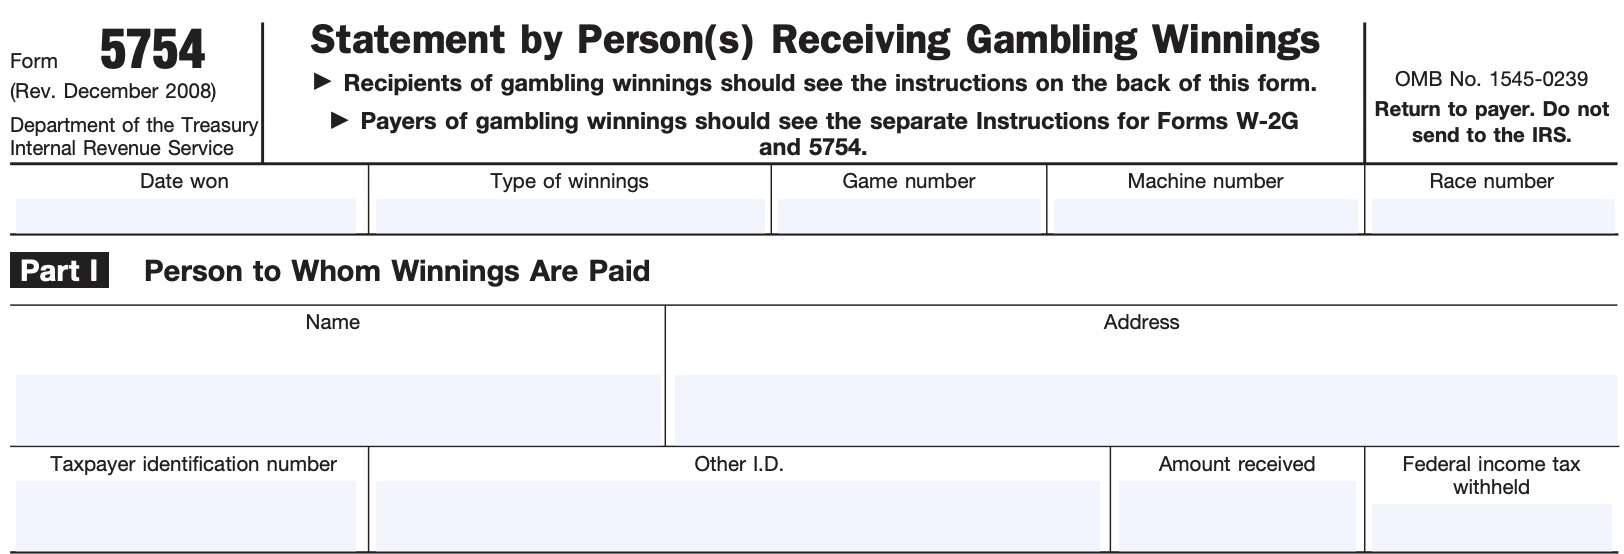 irs form 5754, part i: person to whom winnings are paid